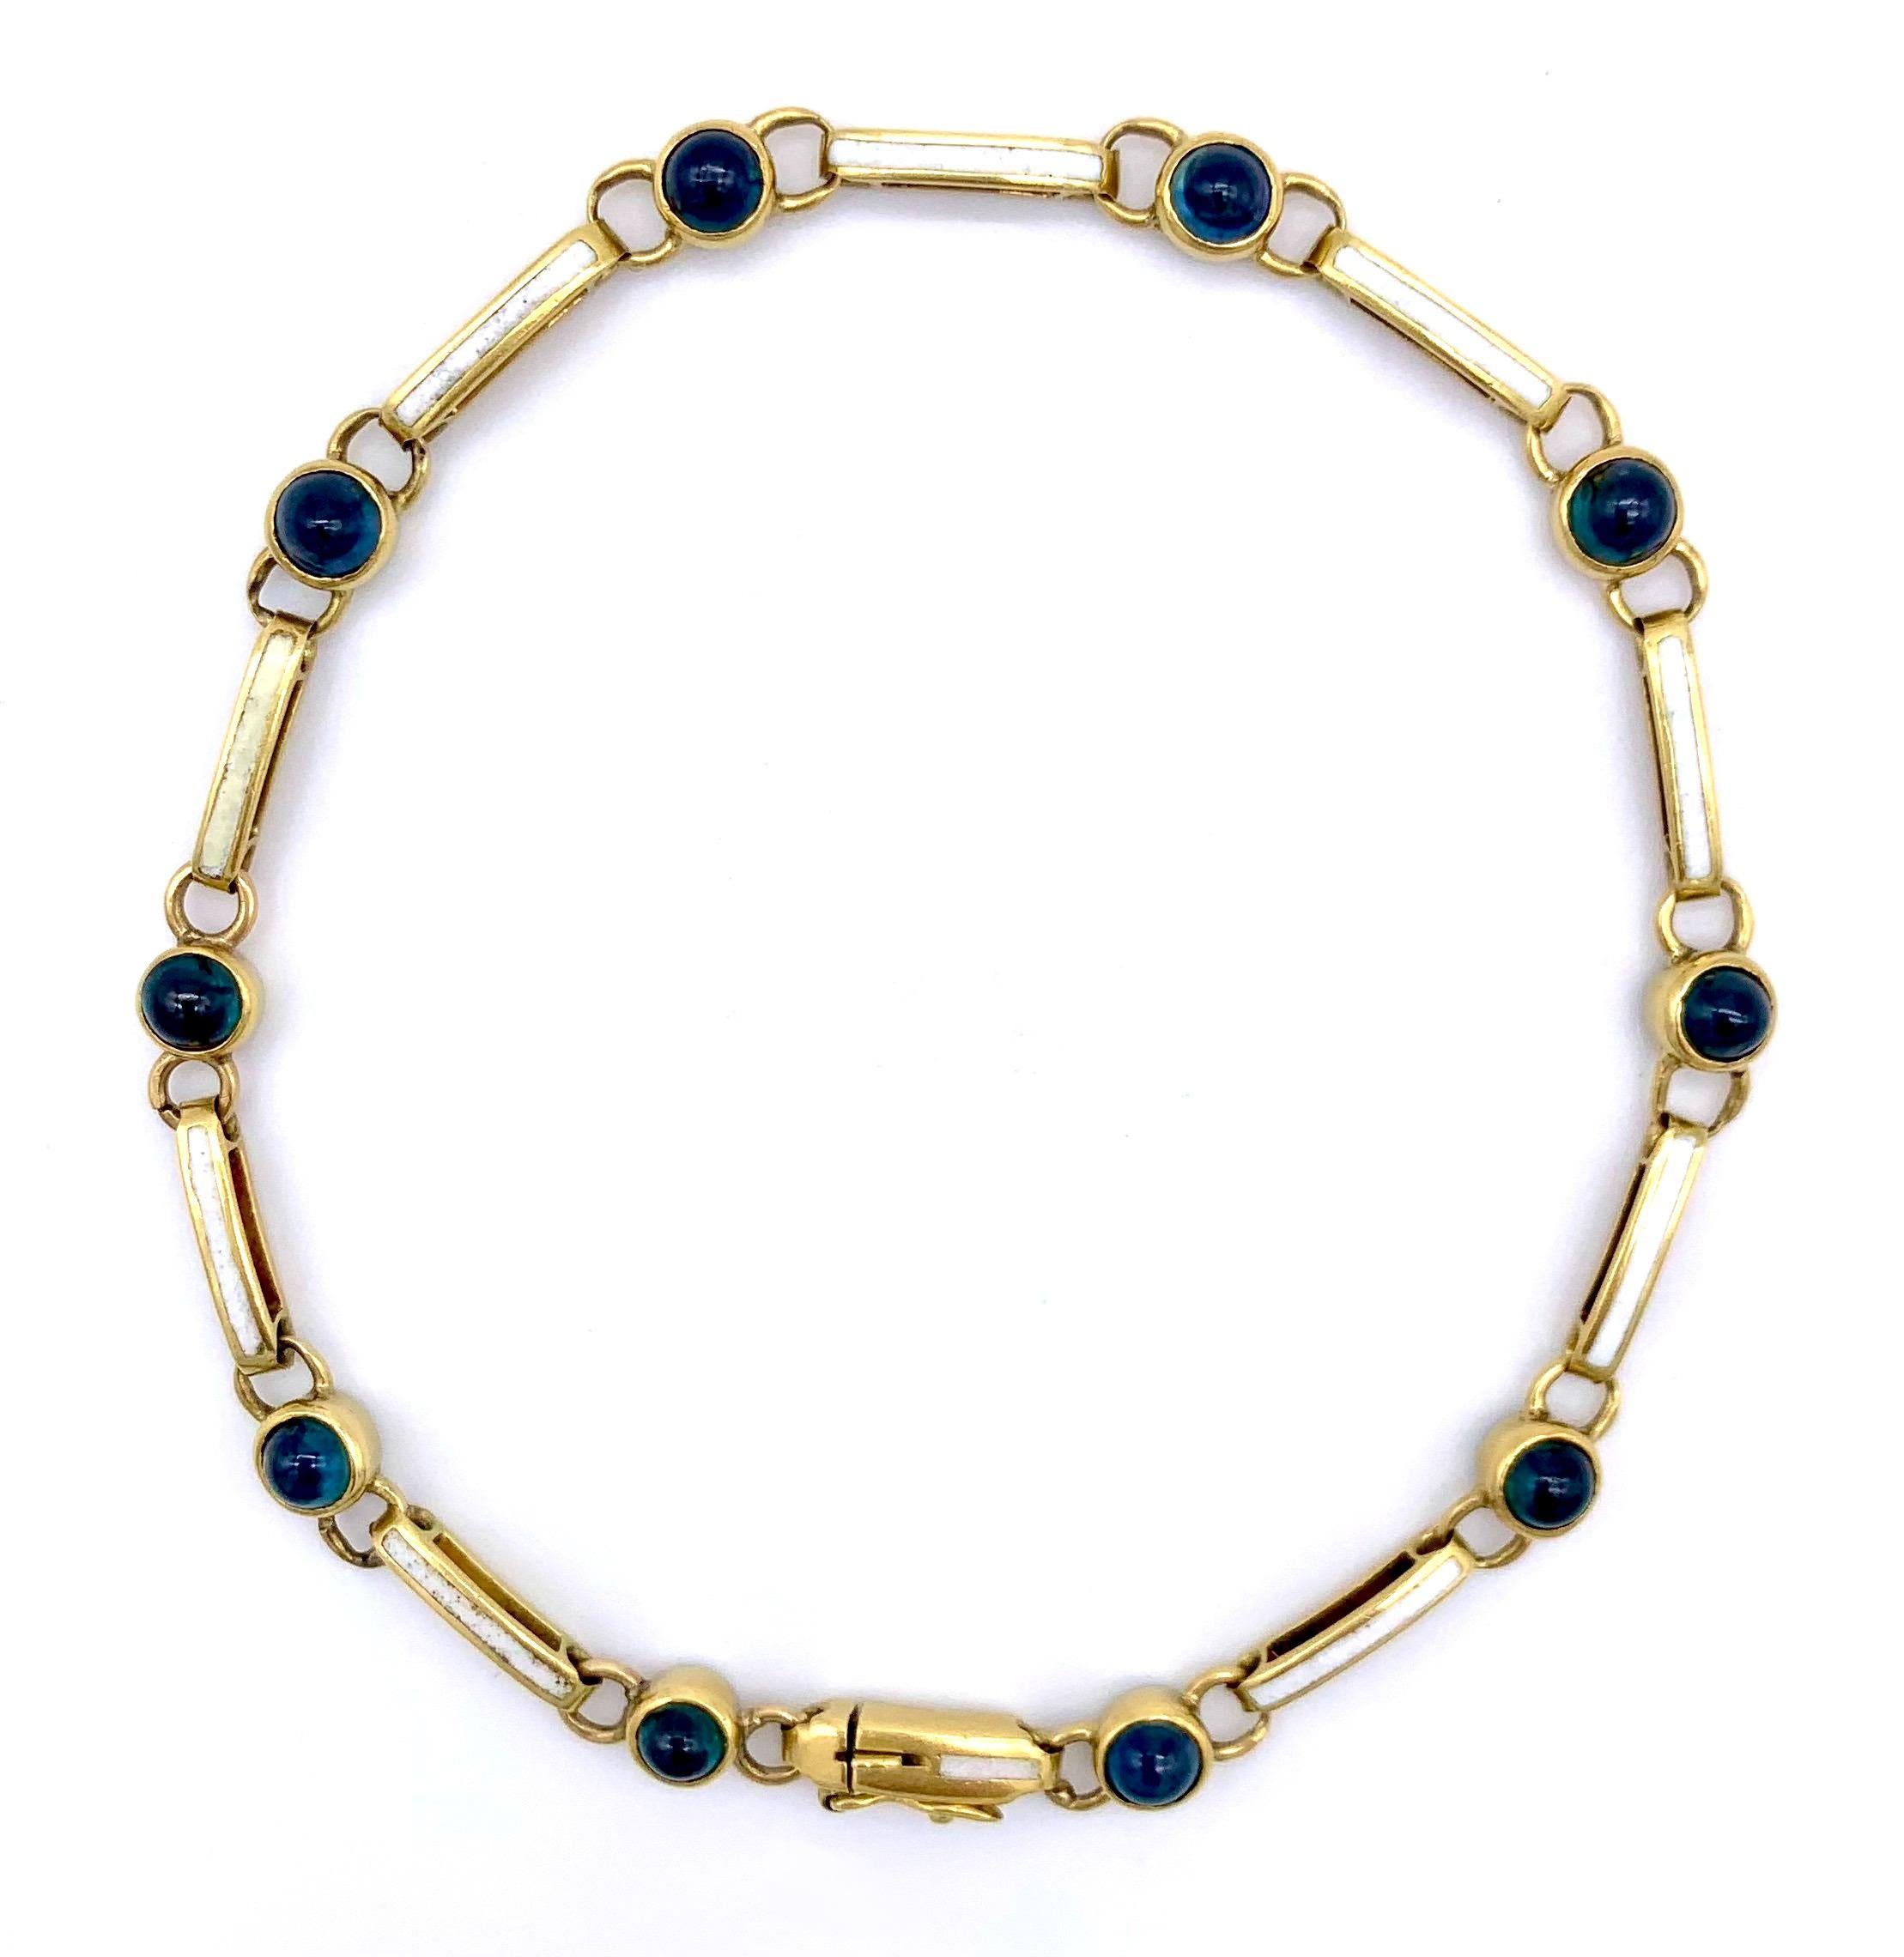 This very elegant 15kt gold bracelet features ten beautiful bright blue sapphire cabochons. They alternate with elongated gold rings that are decorated with opaque white enamel.
The bracelet is signed with makers initials. 